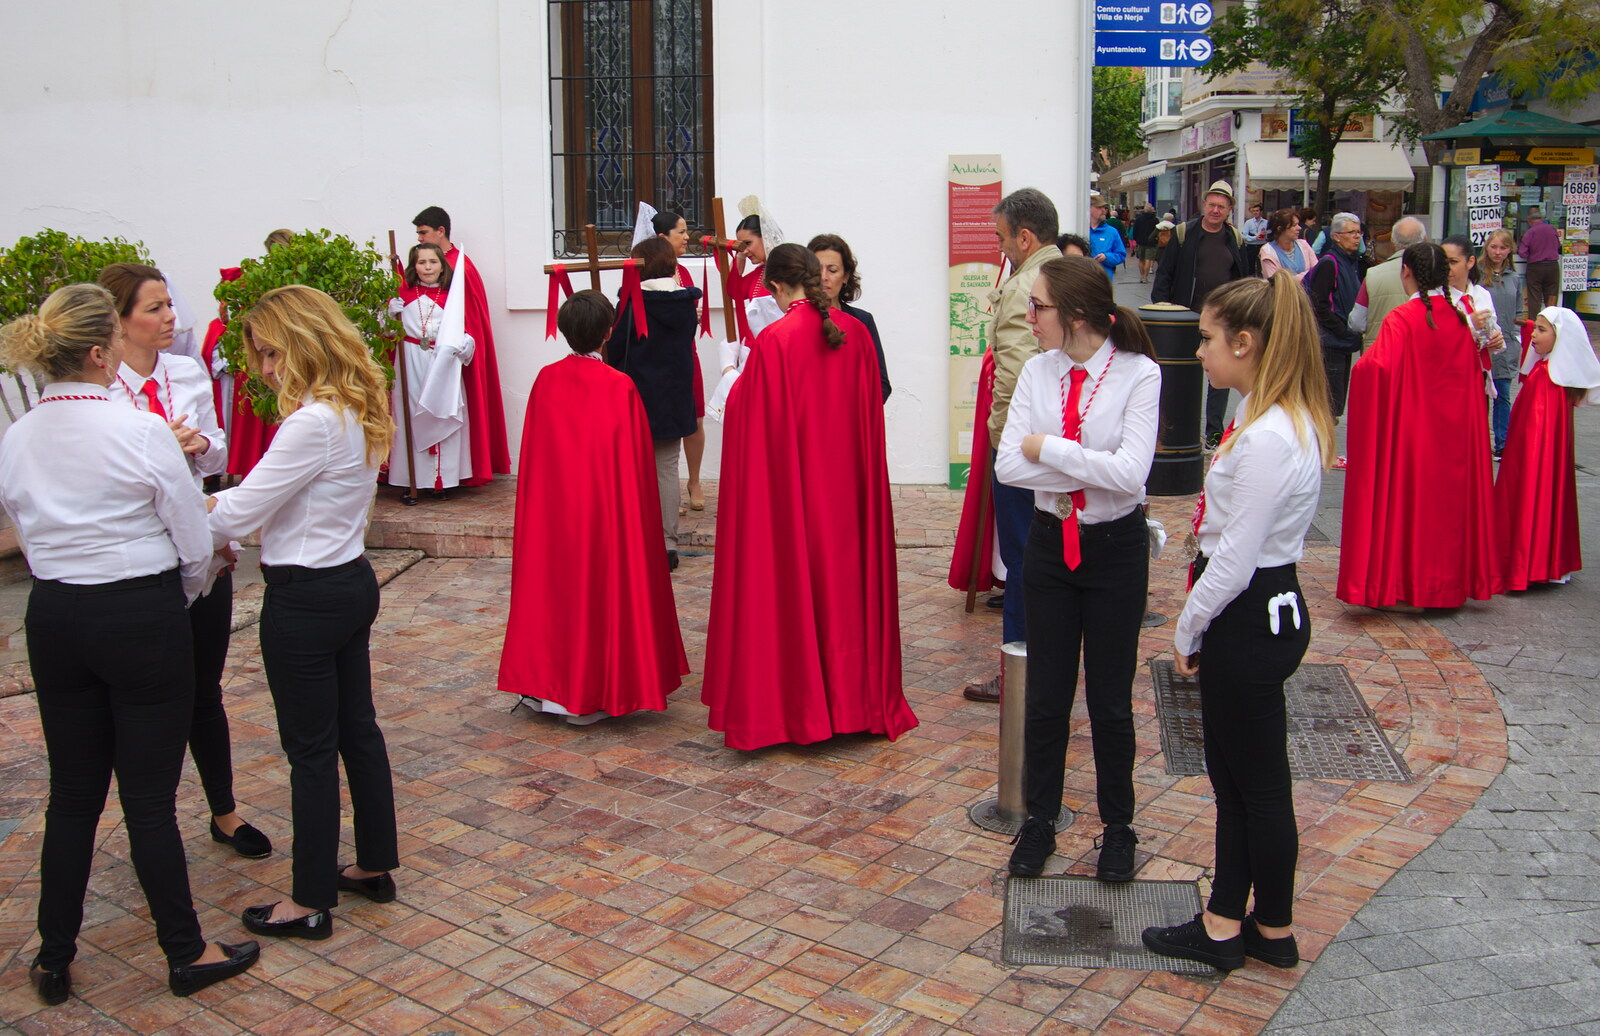 Outside the church from An Easter Parade, Nerja, Andalusia, Spain - 21st April 2019